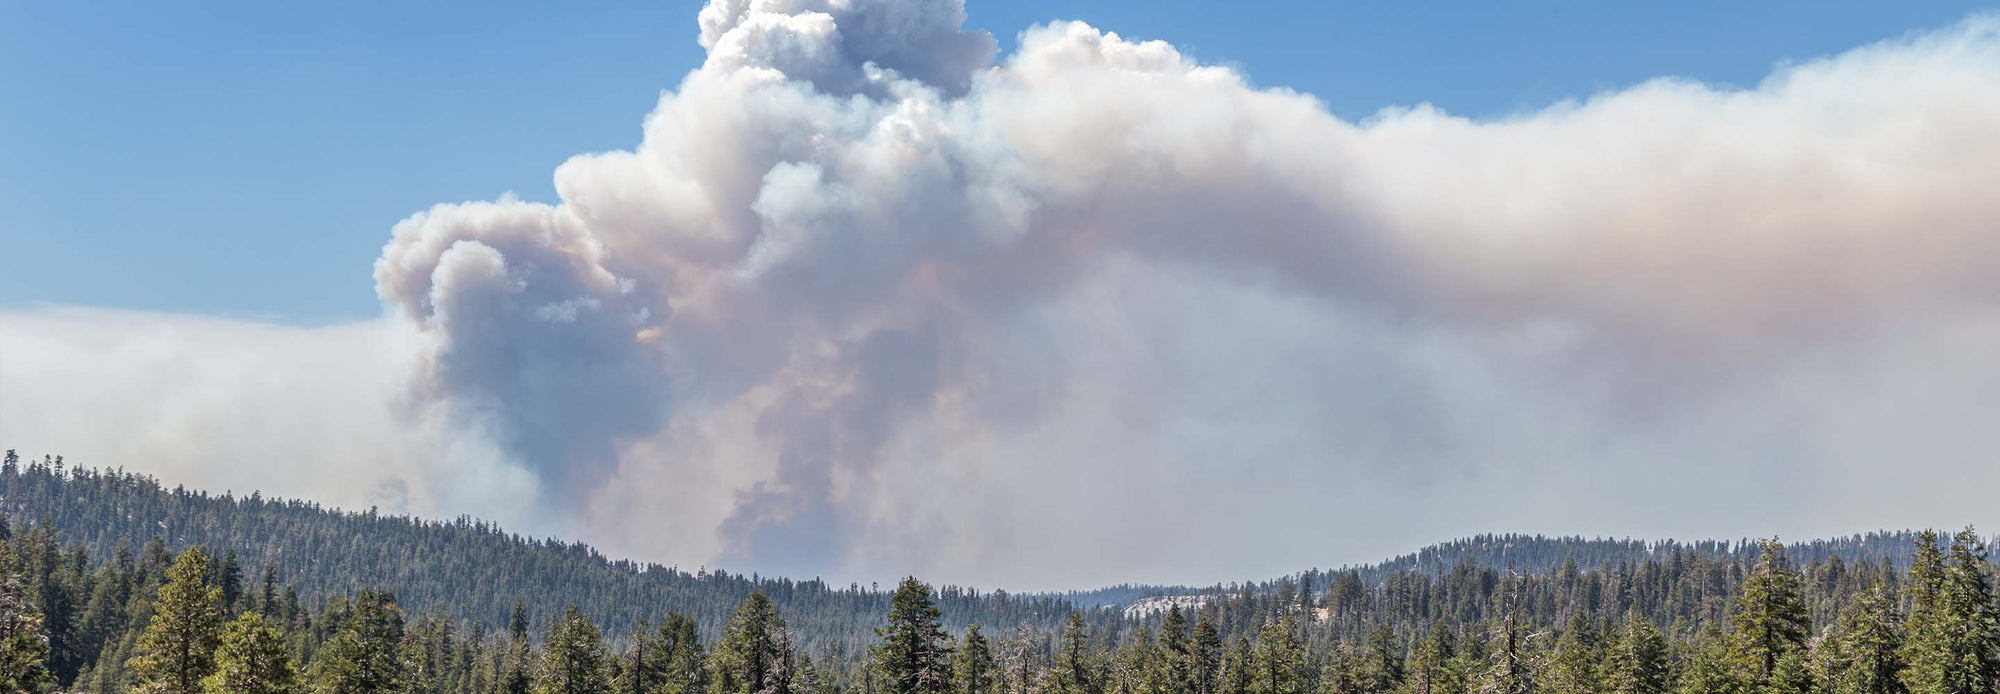 Wildfire in Stanislaus National Forest.